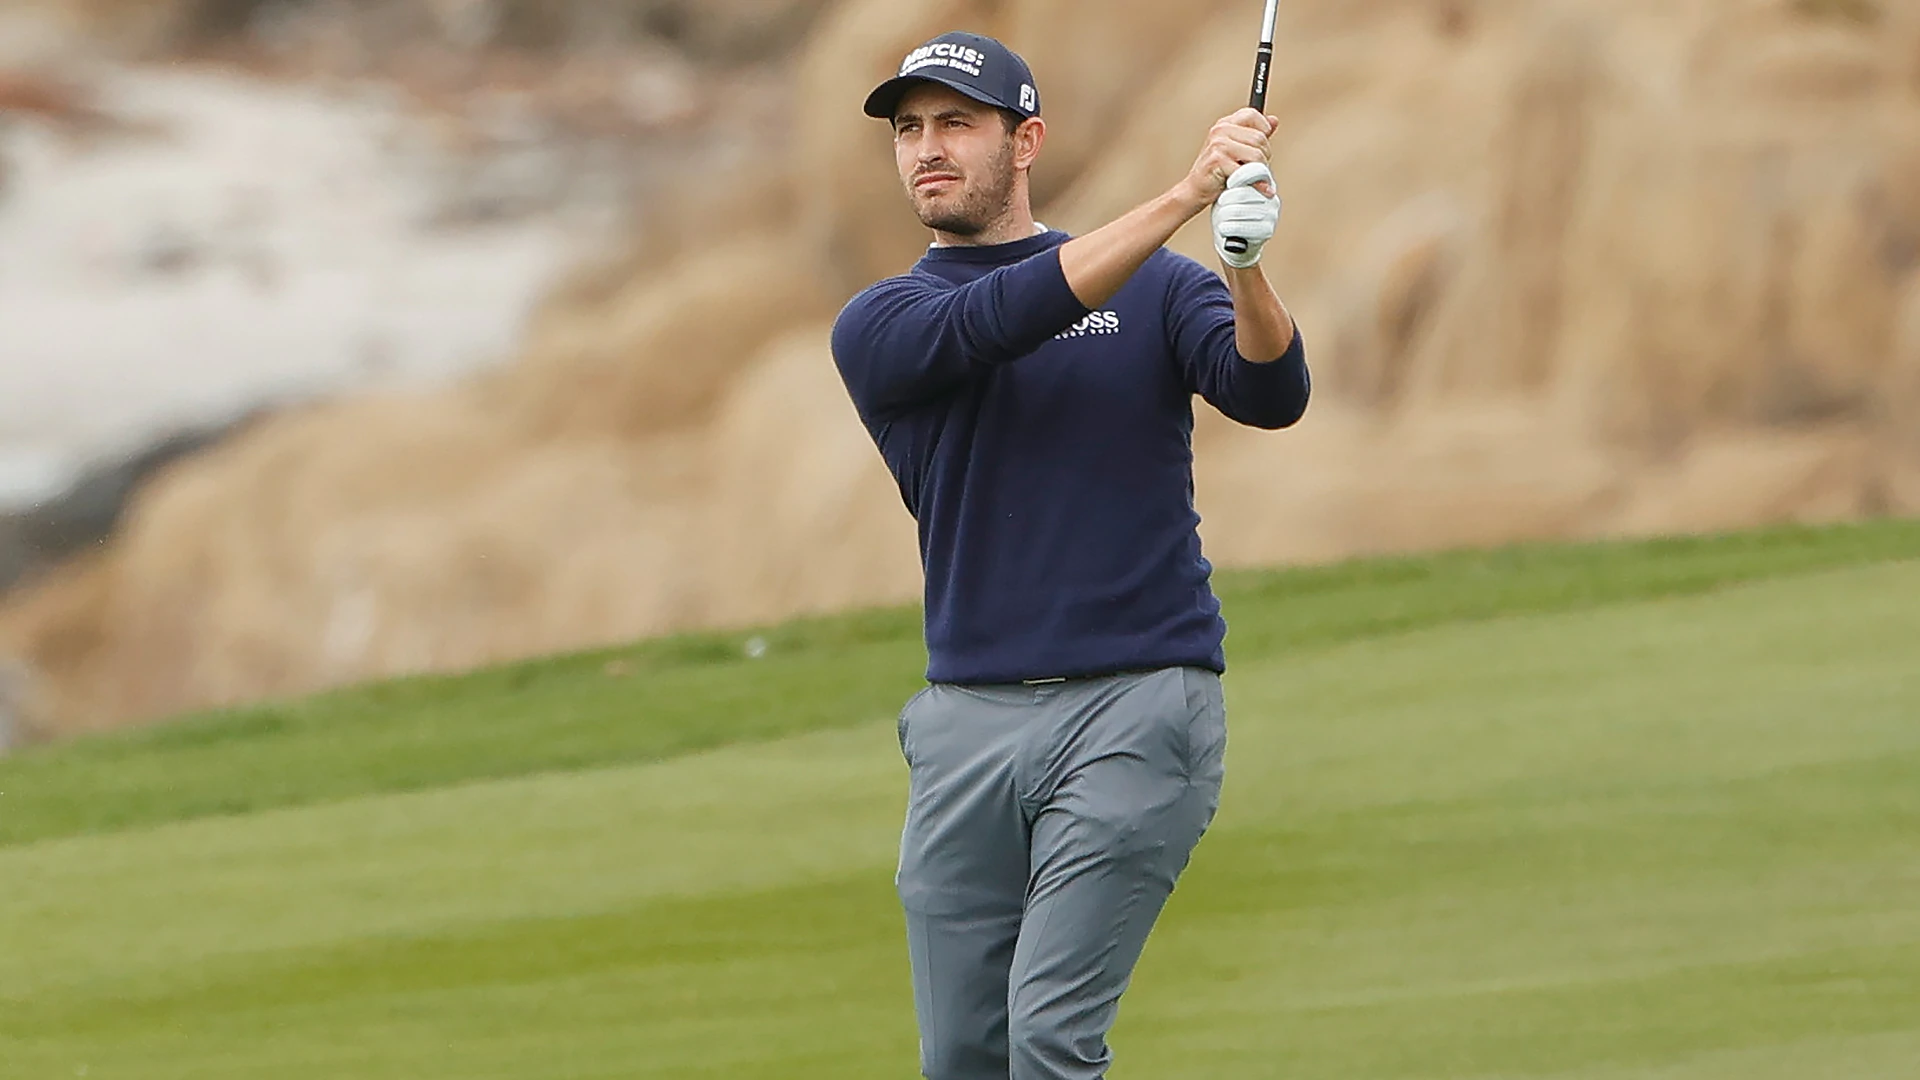 Patrick Cantlay ties Pebble Beach course record with 62 to lead AT&T Pro-Am